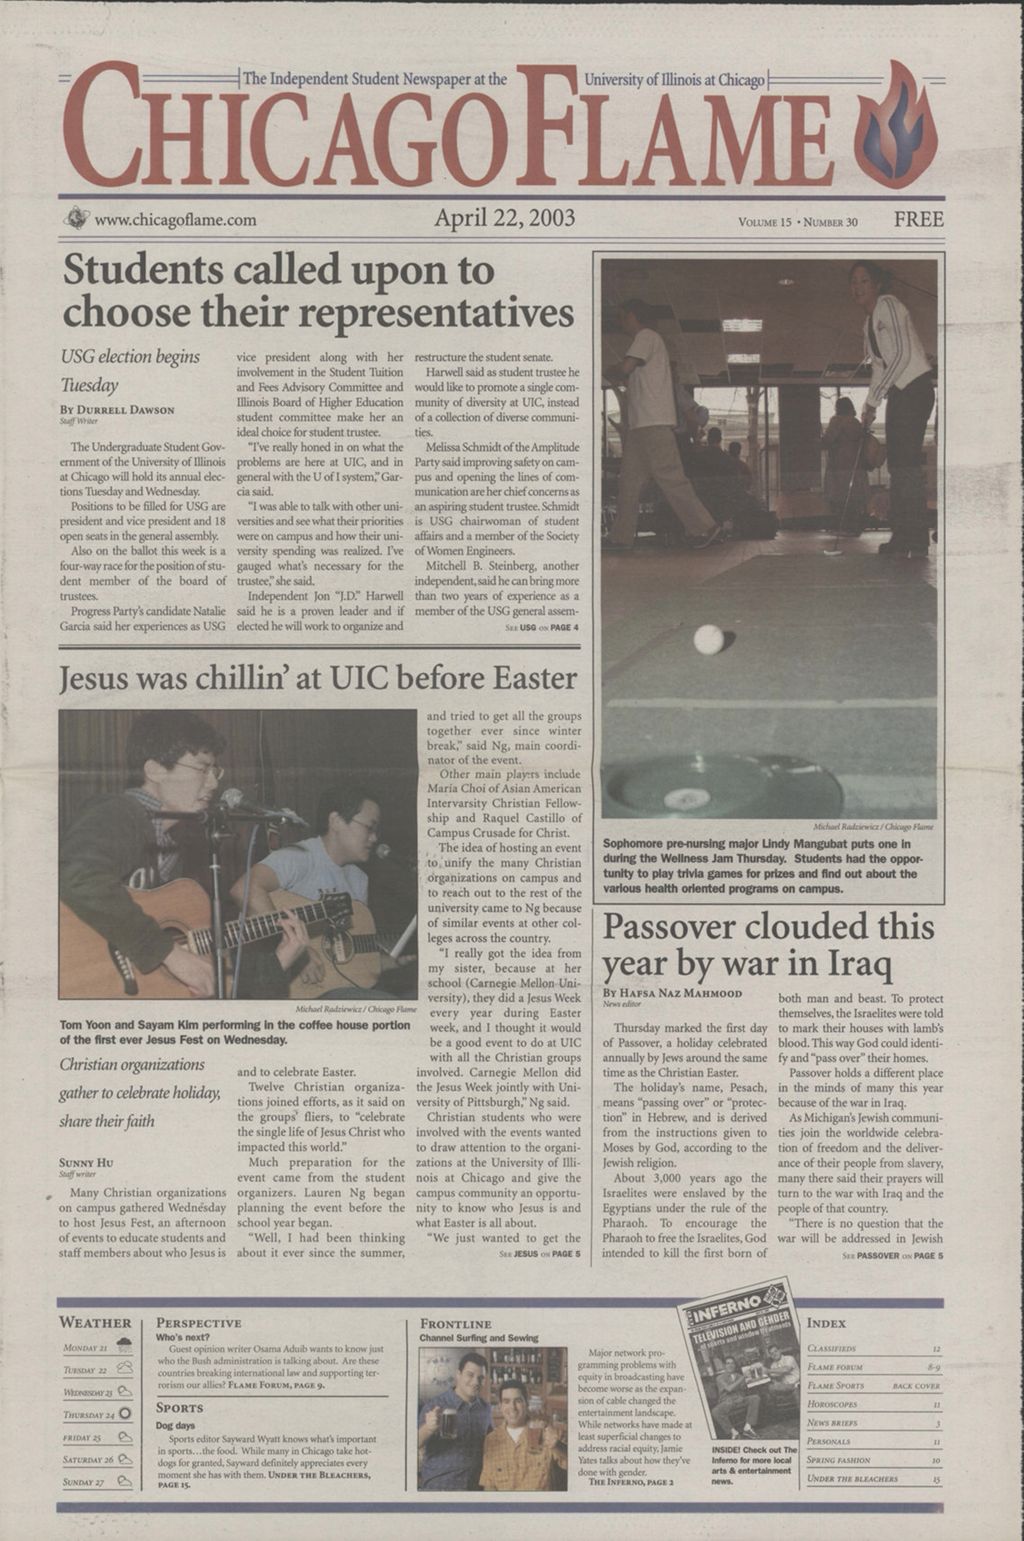 Chicago Flame (April 22, 2003)